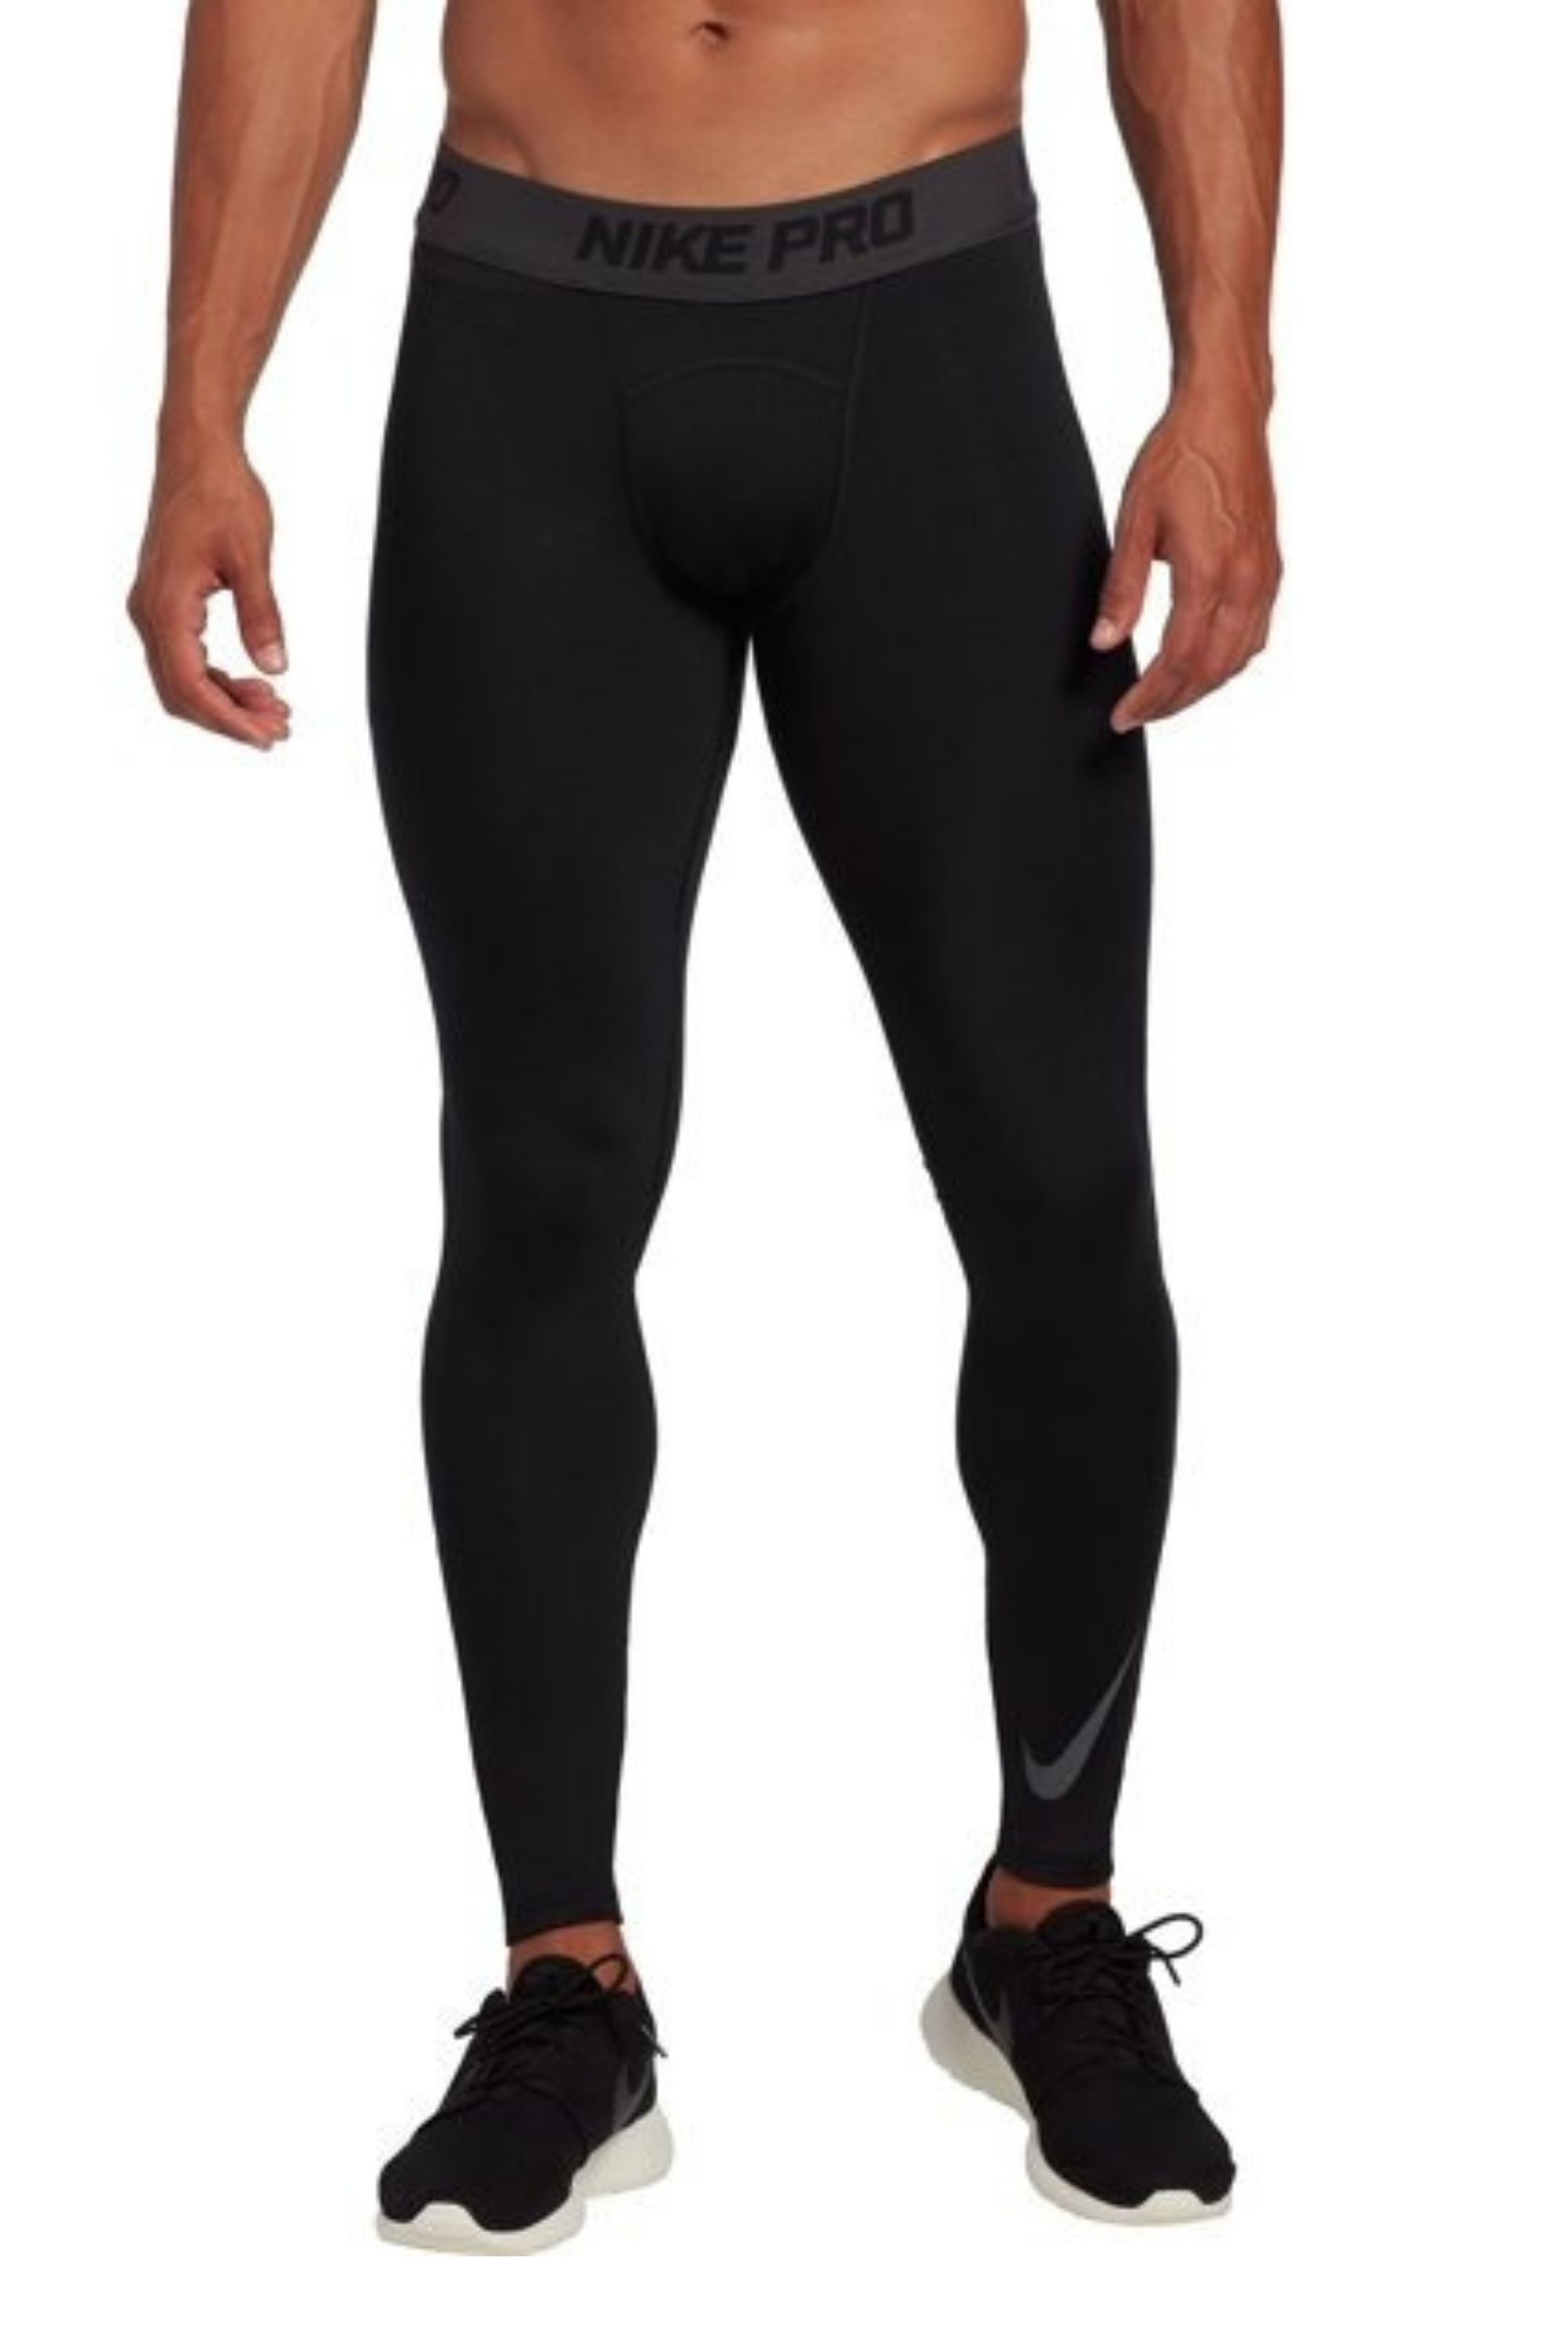 Men's Thermal Compression Pants Pockets Dry Fit Gym Sports Leggings Wintergear Base Layer Bottoms Running Tights 